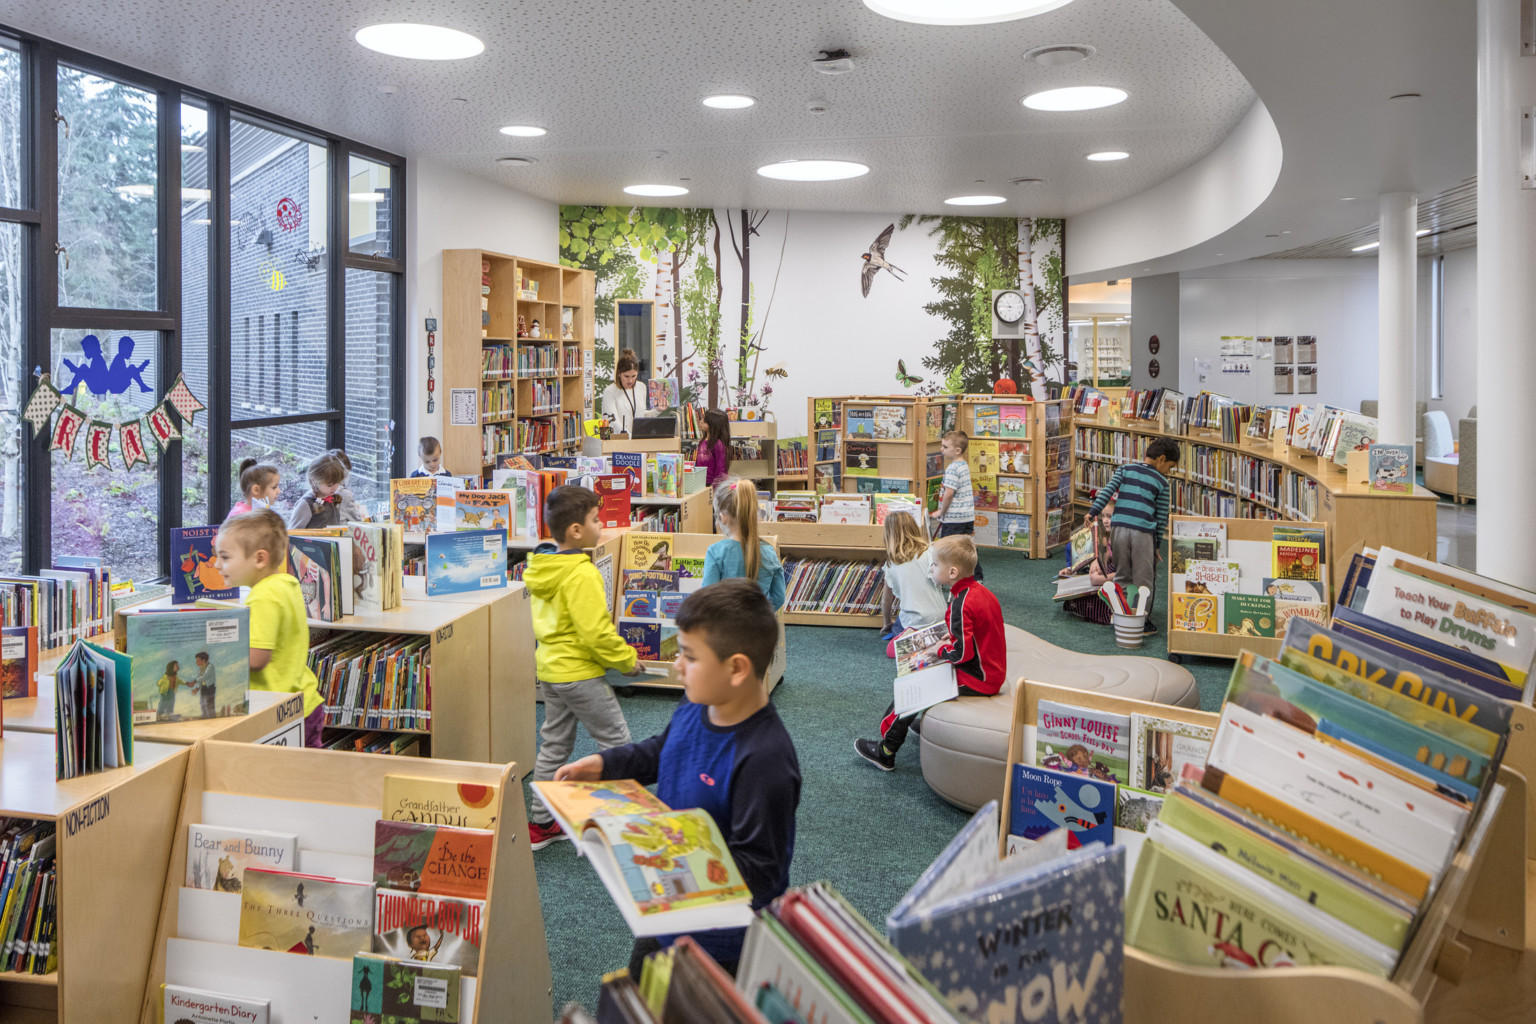 A library with children's bookshelves and seating. Floor to ceiling windows, left. A mural on far wall of trees and birds